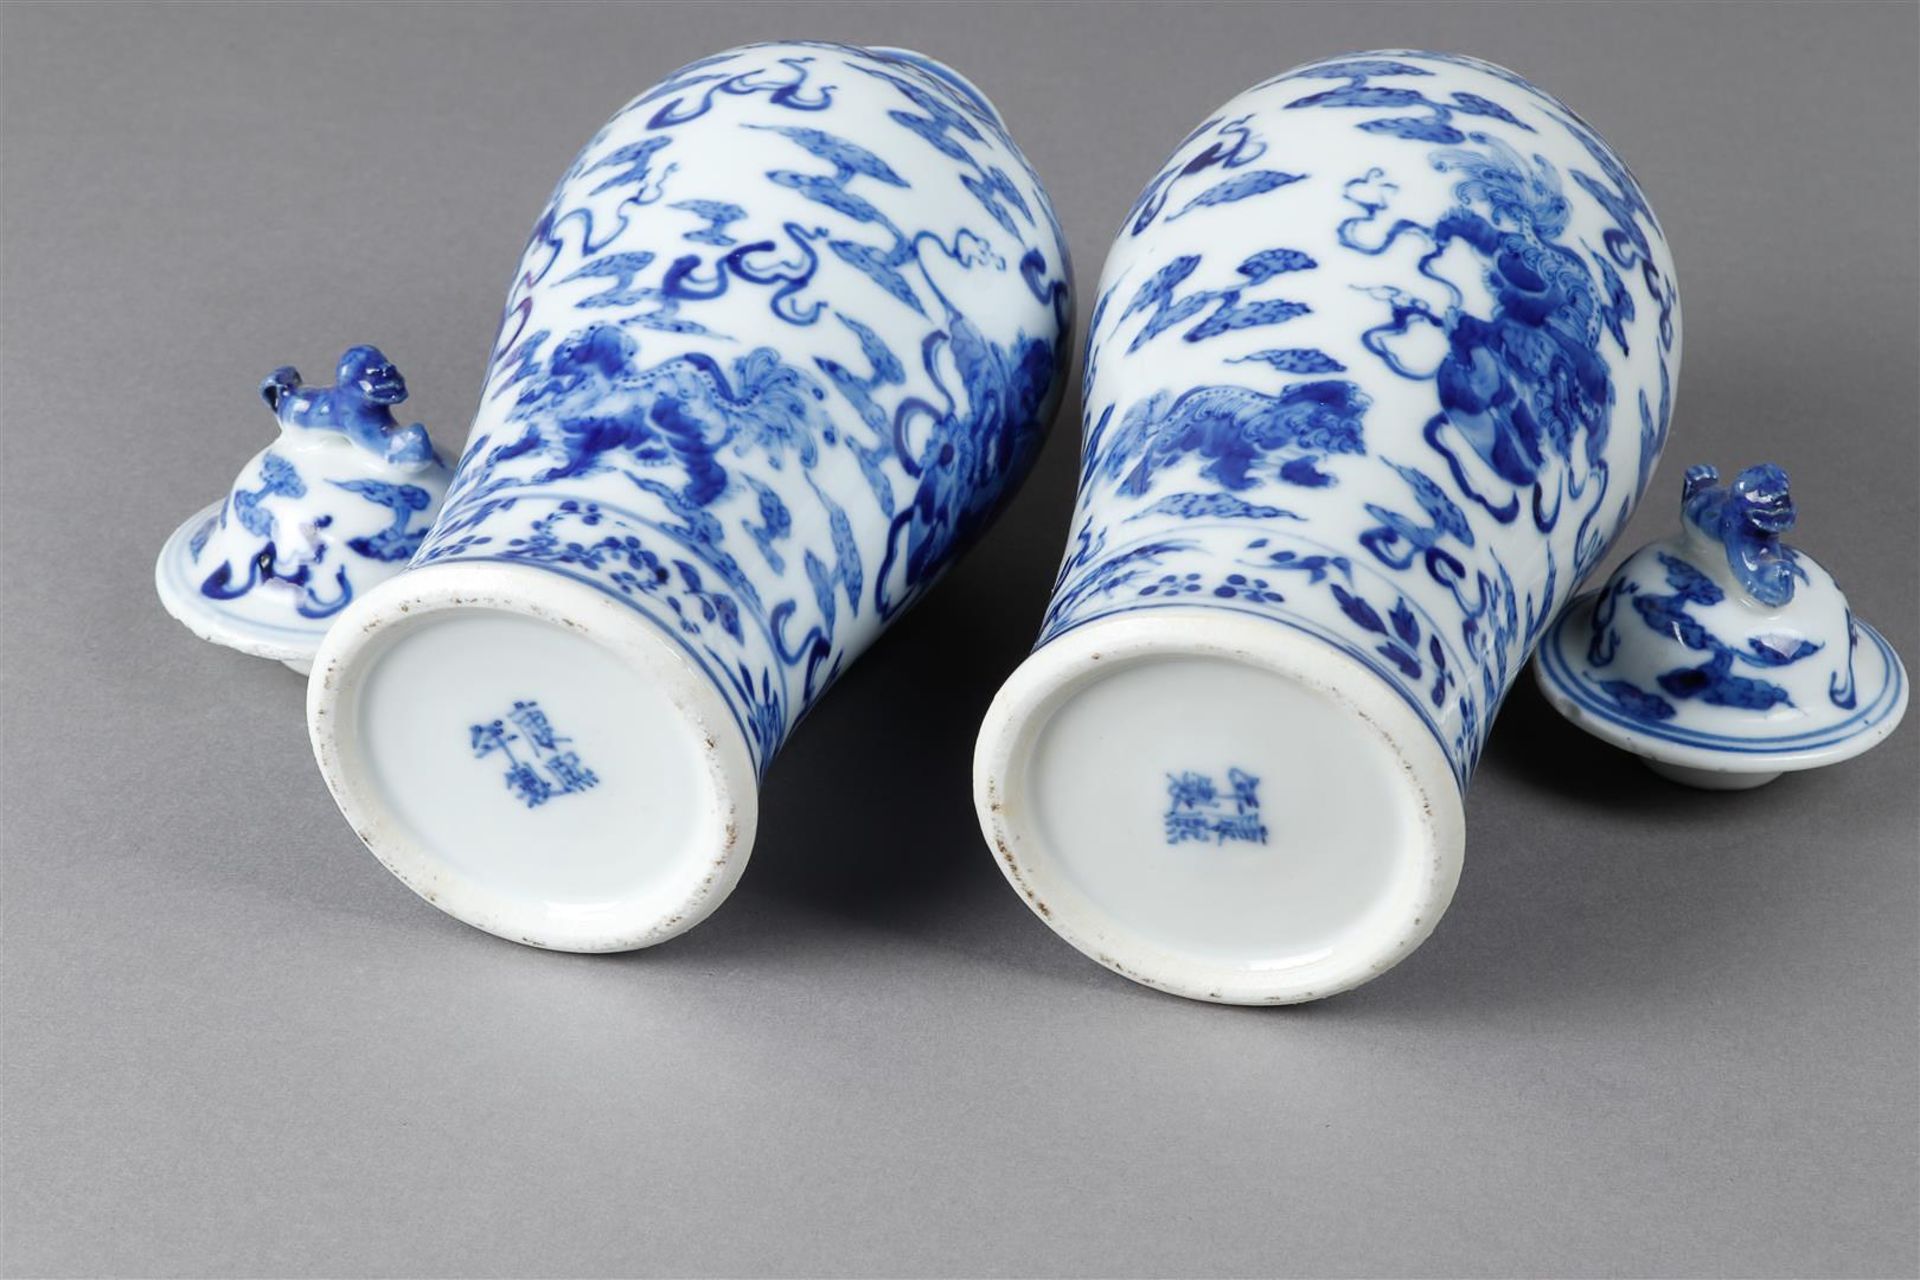 A set of two porcelain lidded vases decorated with dragons, marked Kangxi. China, 19th century. - Image 3 of 4